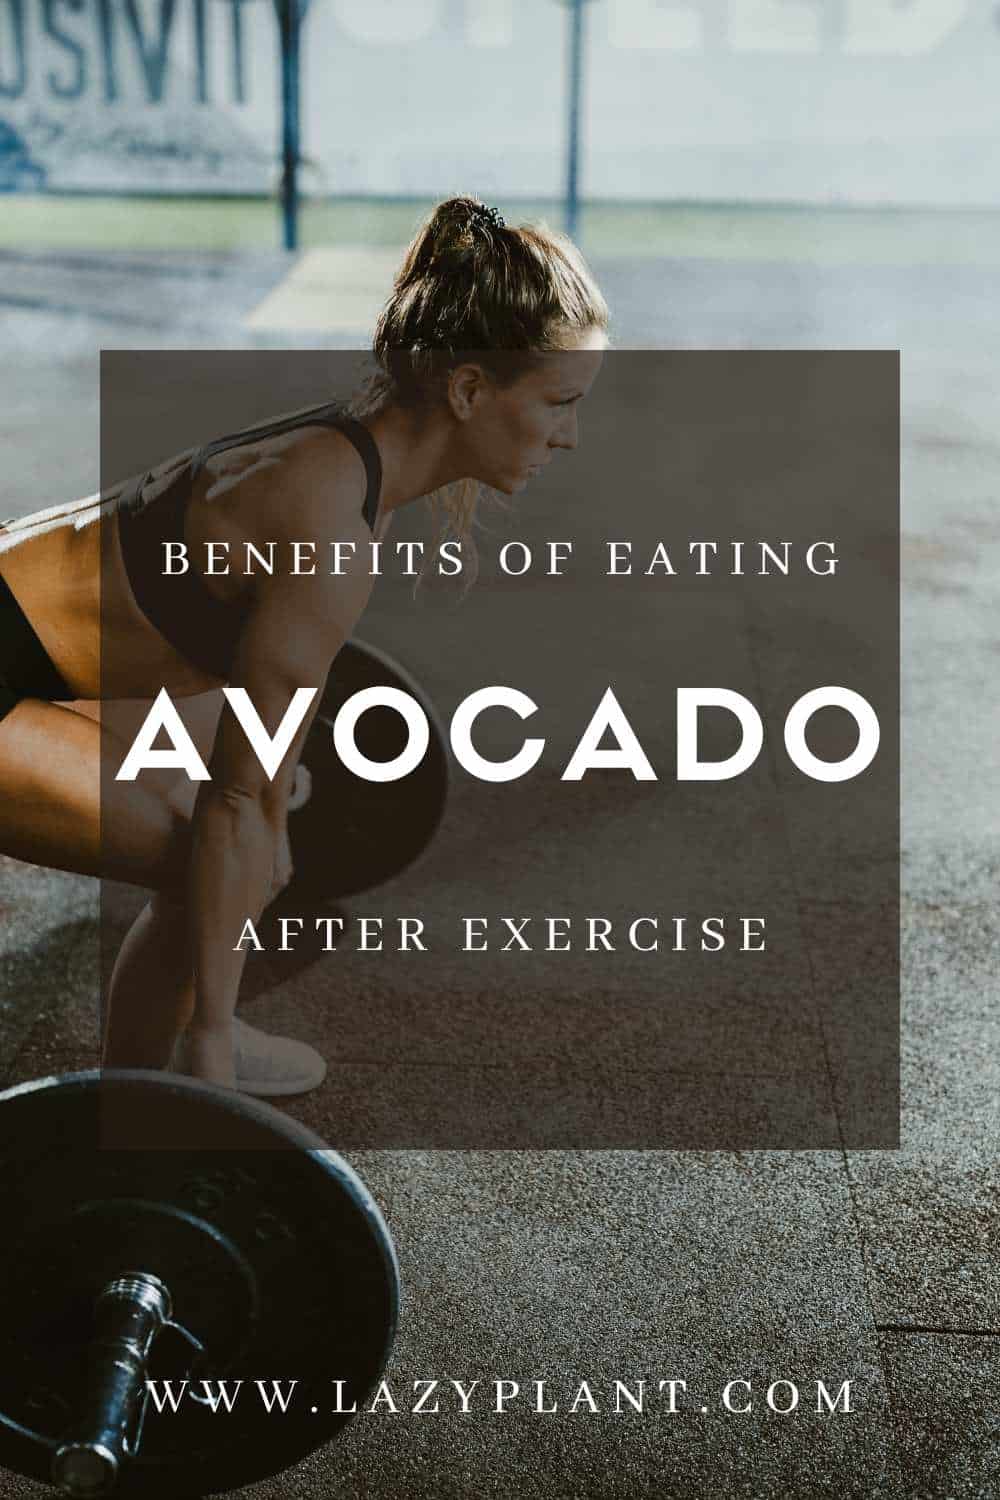 How to eat avocado for muscle growth?